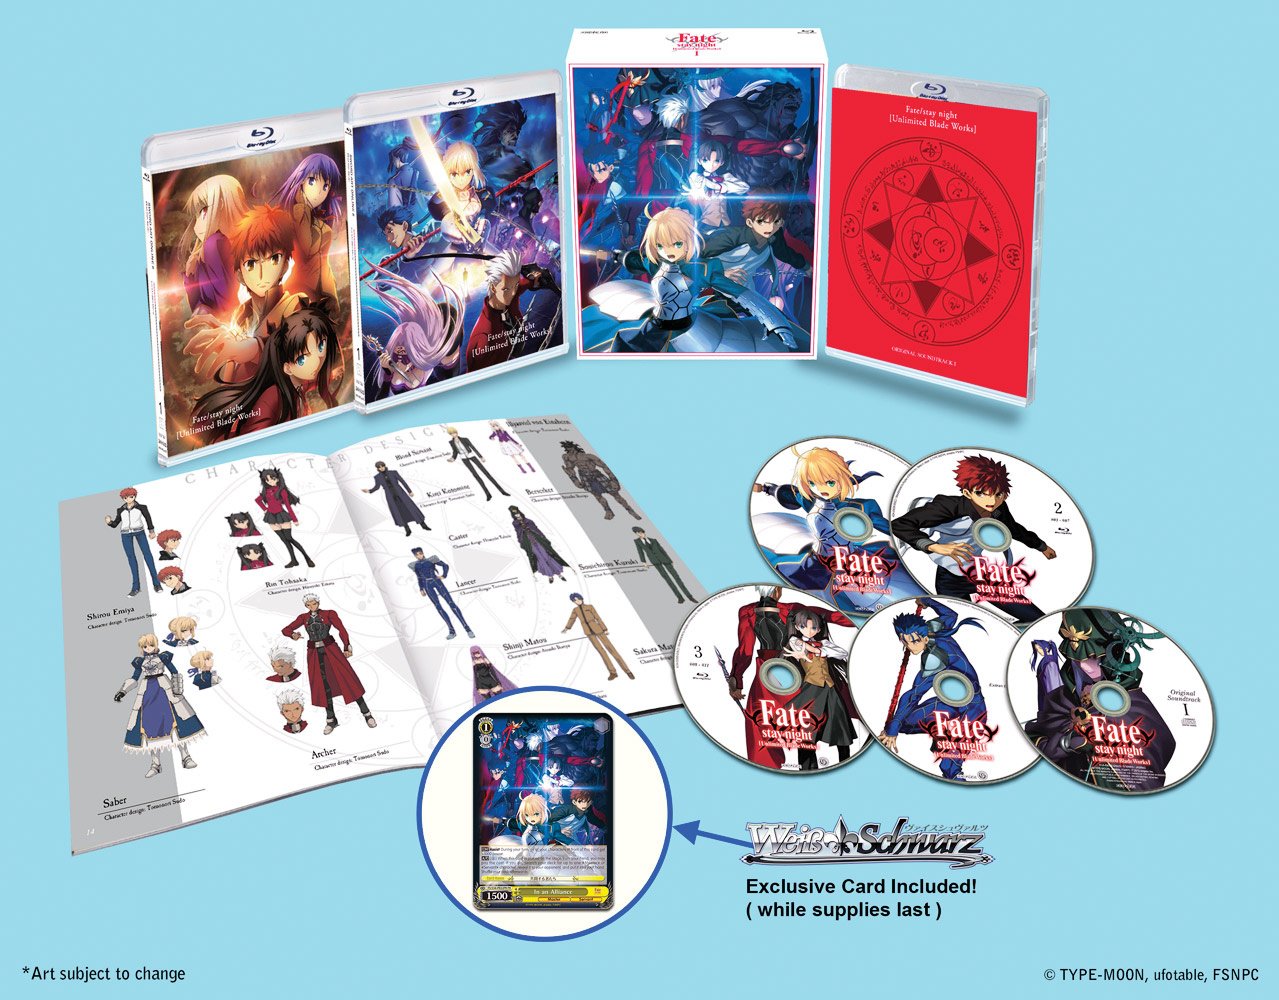 Fate/stay night: Unlimited Blade Works Limited Edition Blu-ray Box Set 1